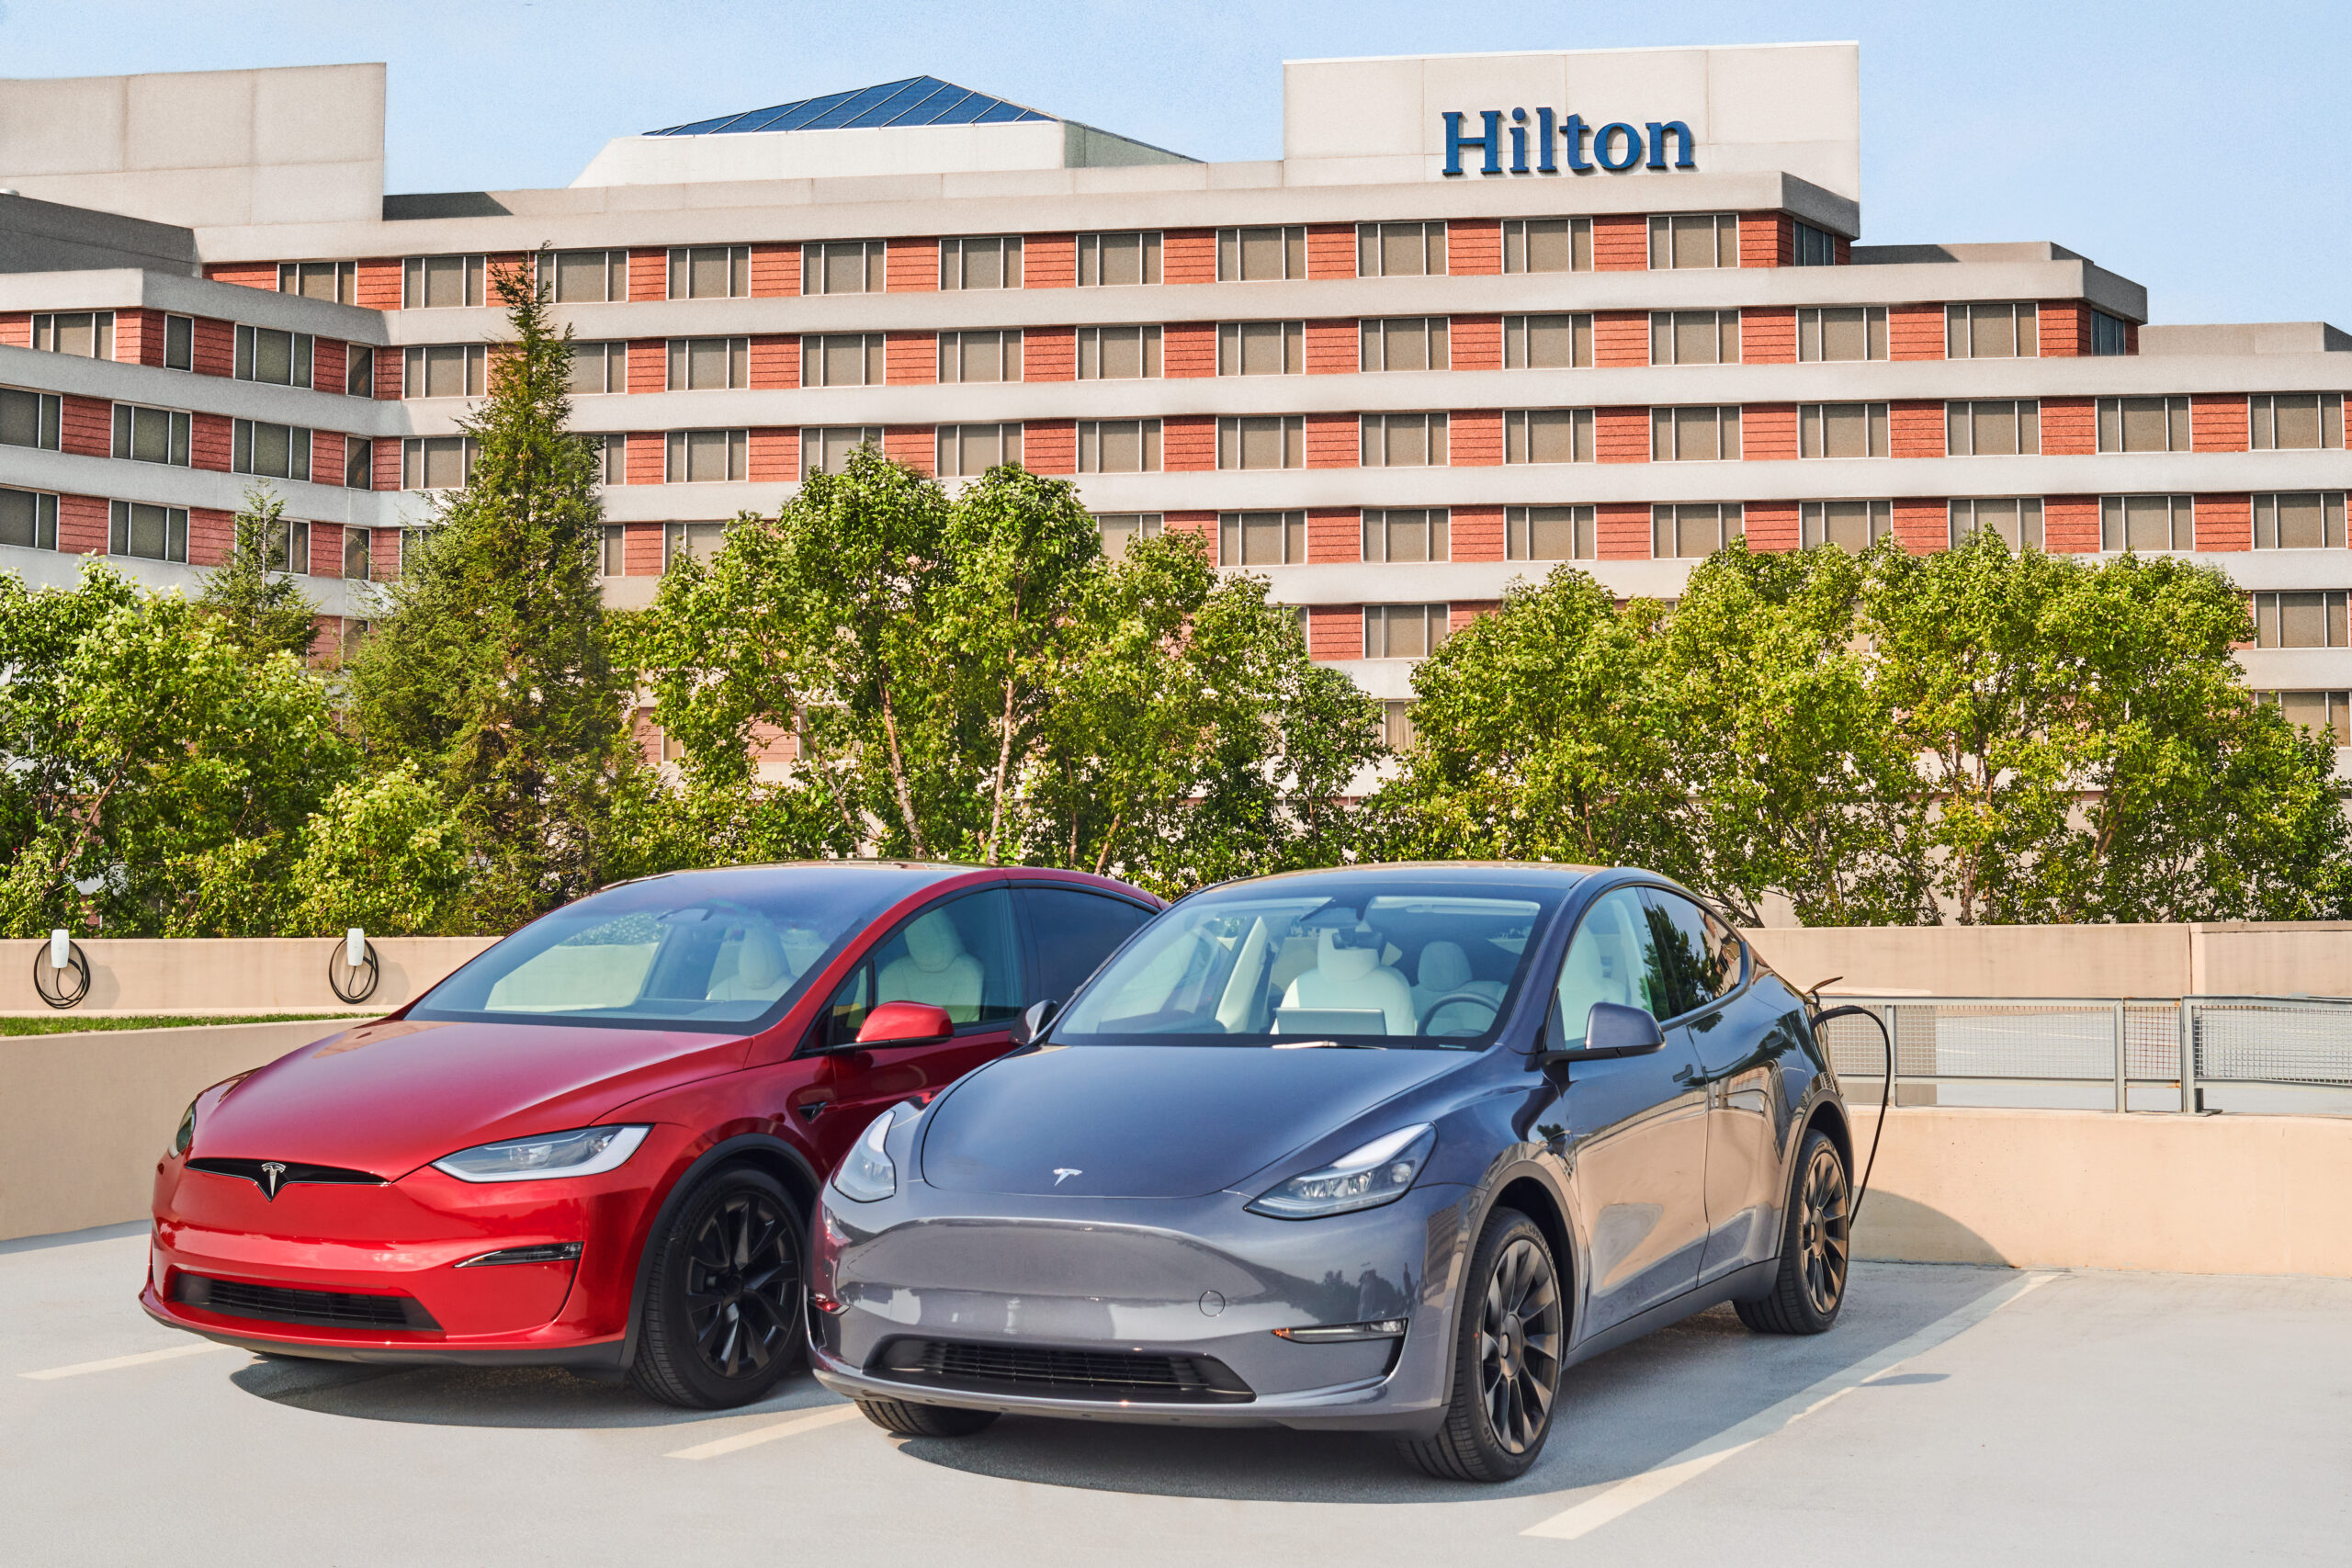 Tesla And Hilton To Add EV Charging At 2,000 Properties